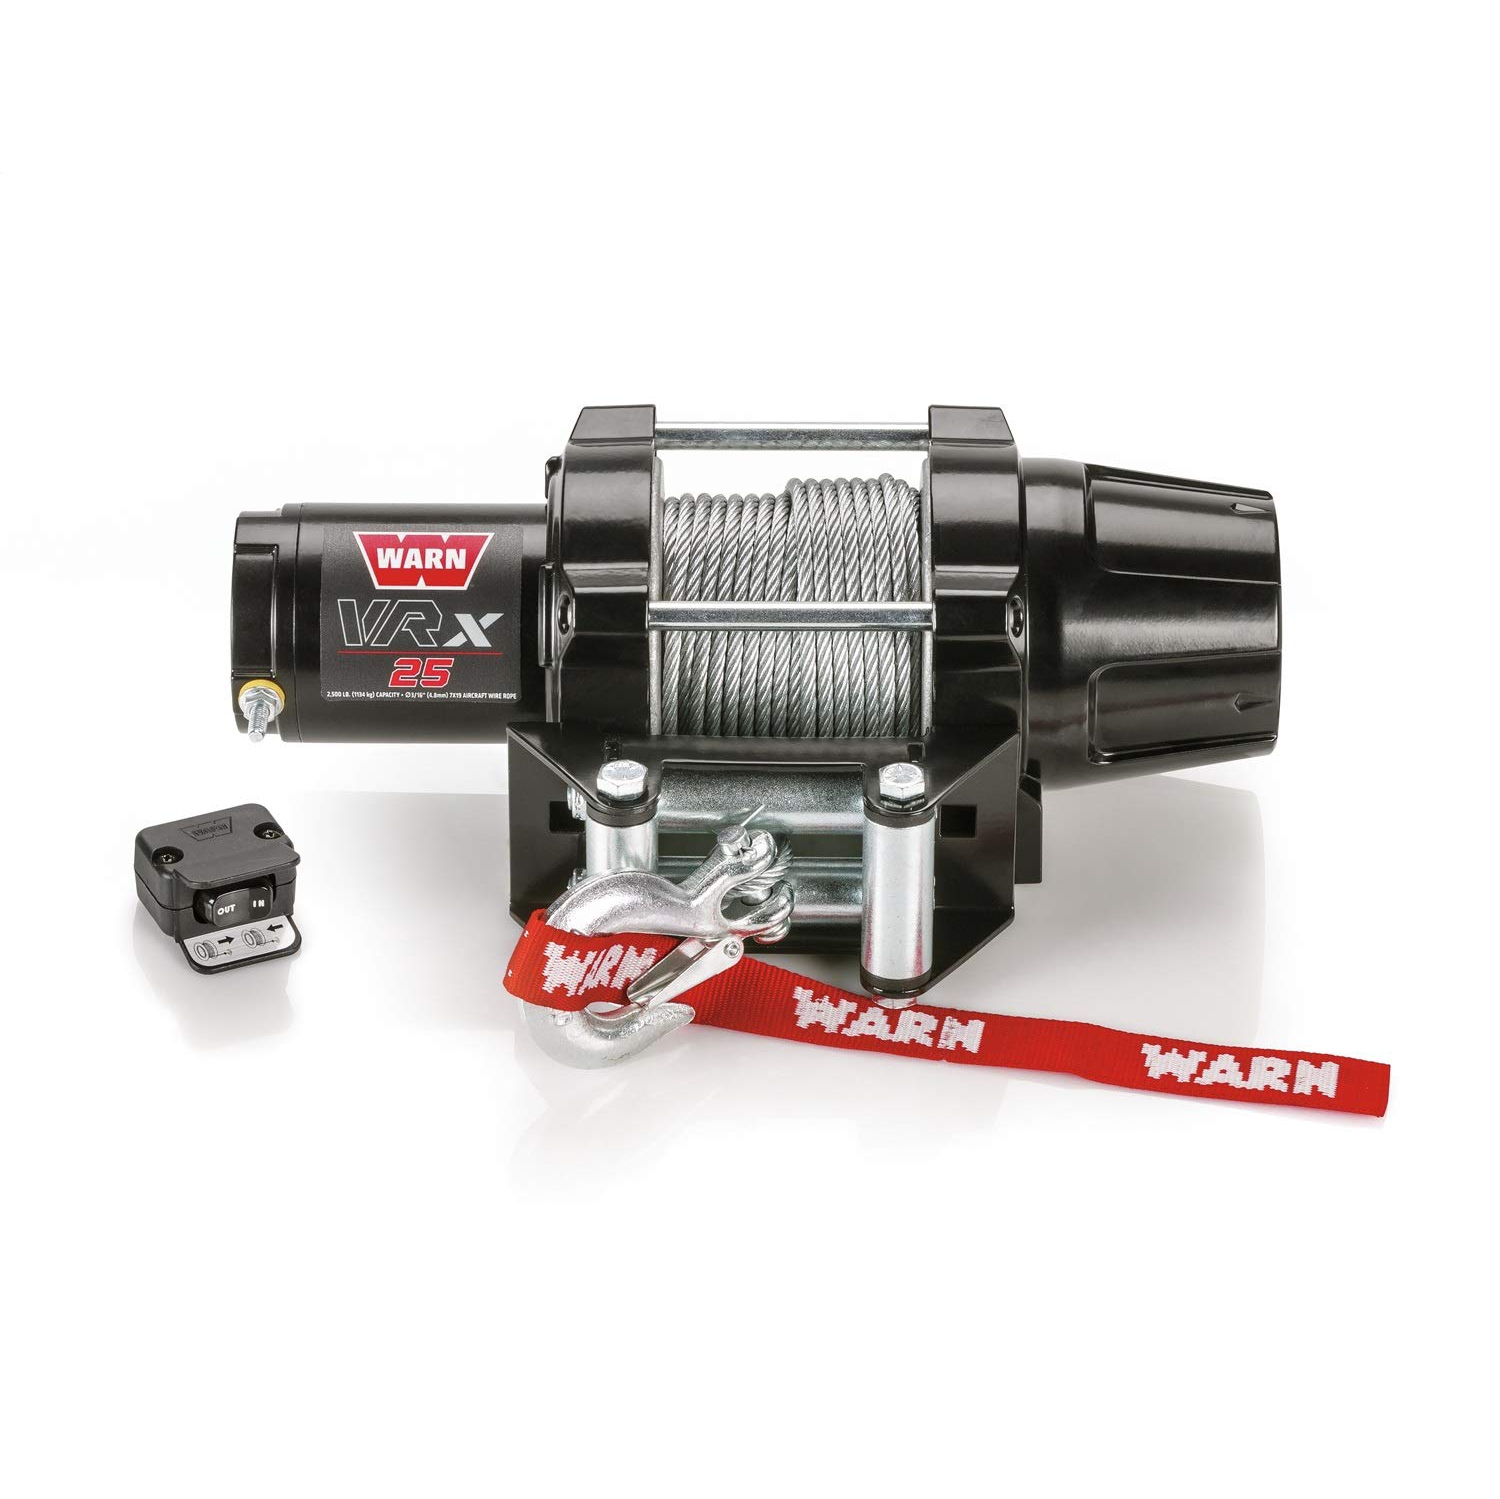 Warn Industries 101025 VRX 25 Powersports Winch with Steel Rope